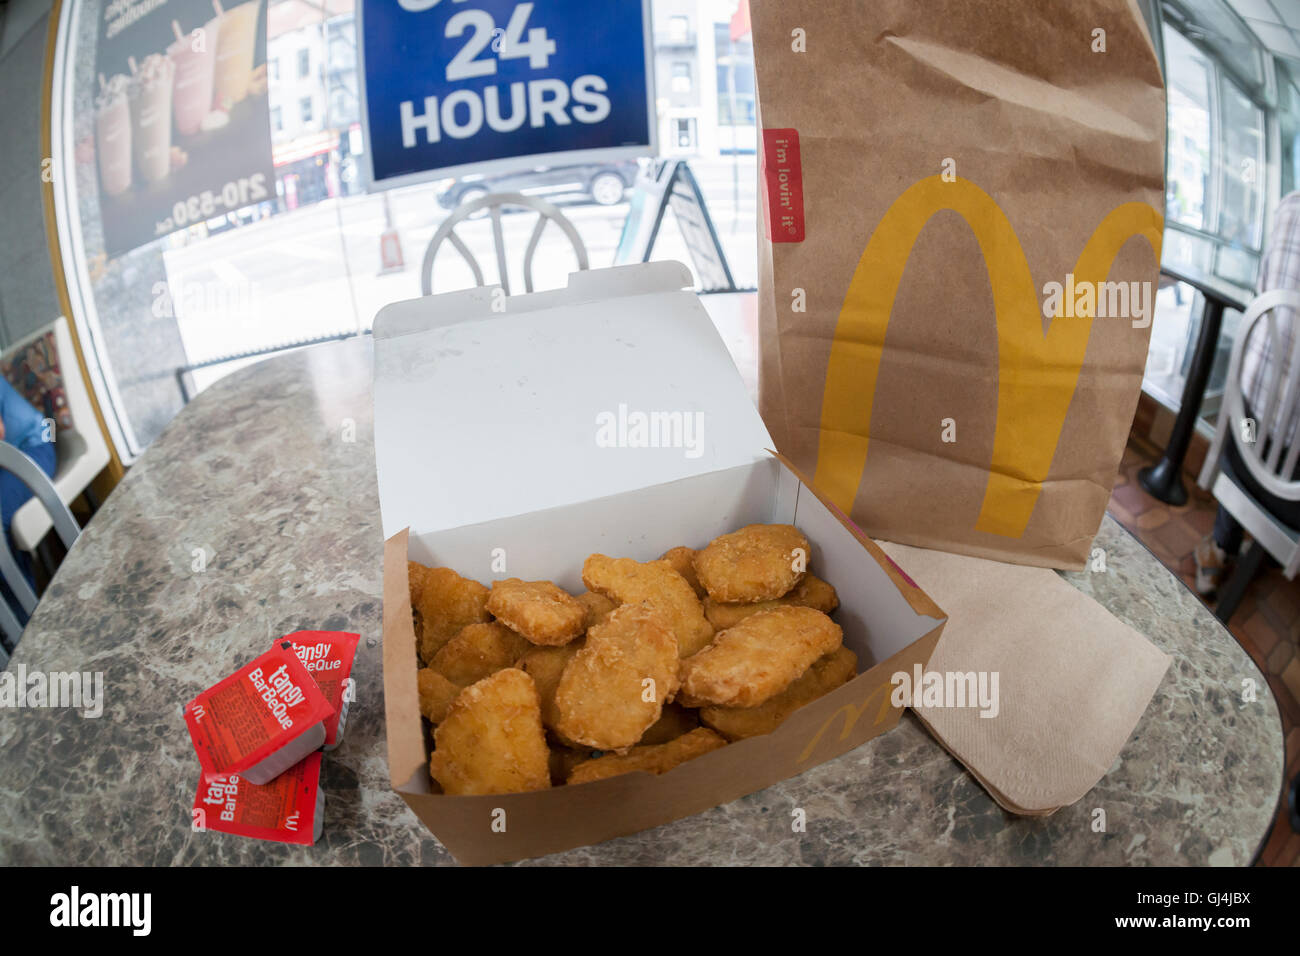 An order of McDonald's Chicken McNuggets in a McDonald's restaurant in New York on Monday, August 1, 2016. McDonald's announced that it has dropped the artificial preservative used in McNuggets cooking oil and and they have removed much of the artificial ingredients contained in the McNuggets. The company also has stopped the use of chickens raised with antibiotics and will remove high fructose corn syrup from its buns, replacing it with sugar.  (© Richard B. Levine) Stock Photo